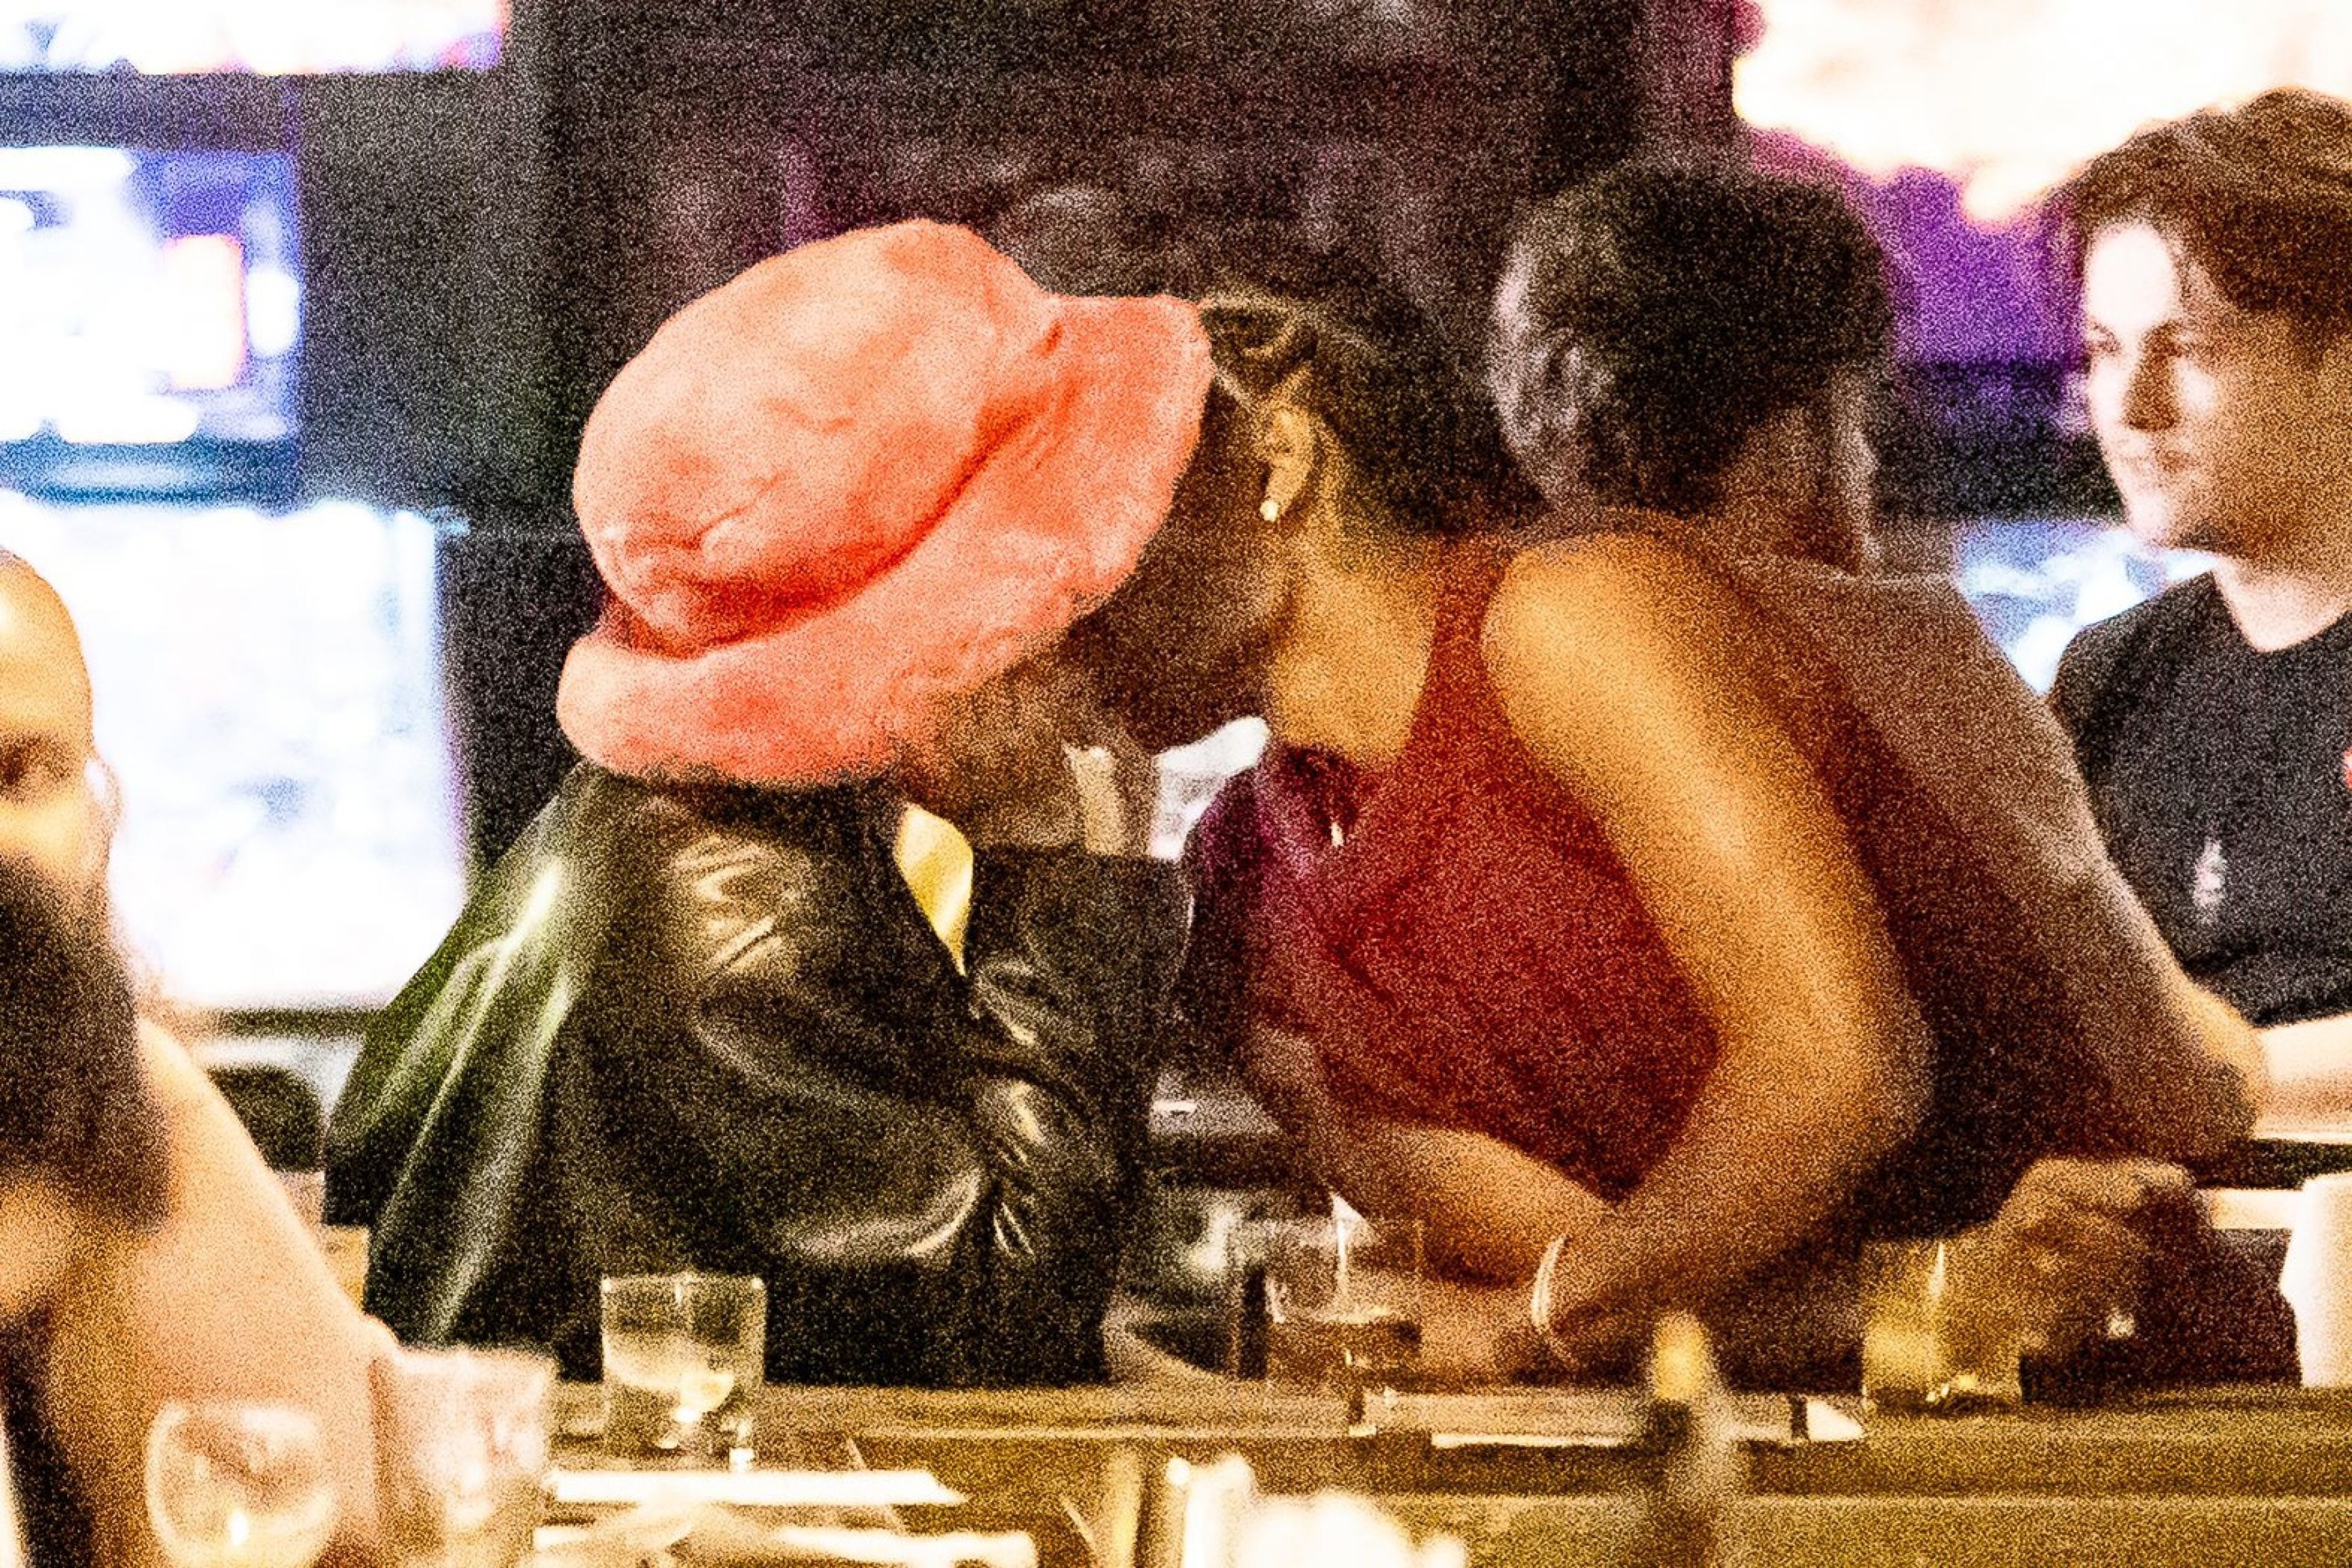 Rihanna and ASAP Rocky have a date night at Barcade, New York, USA